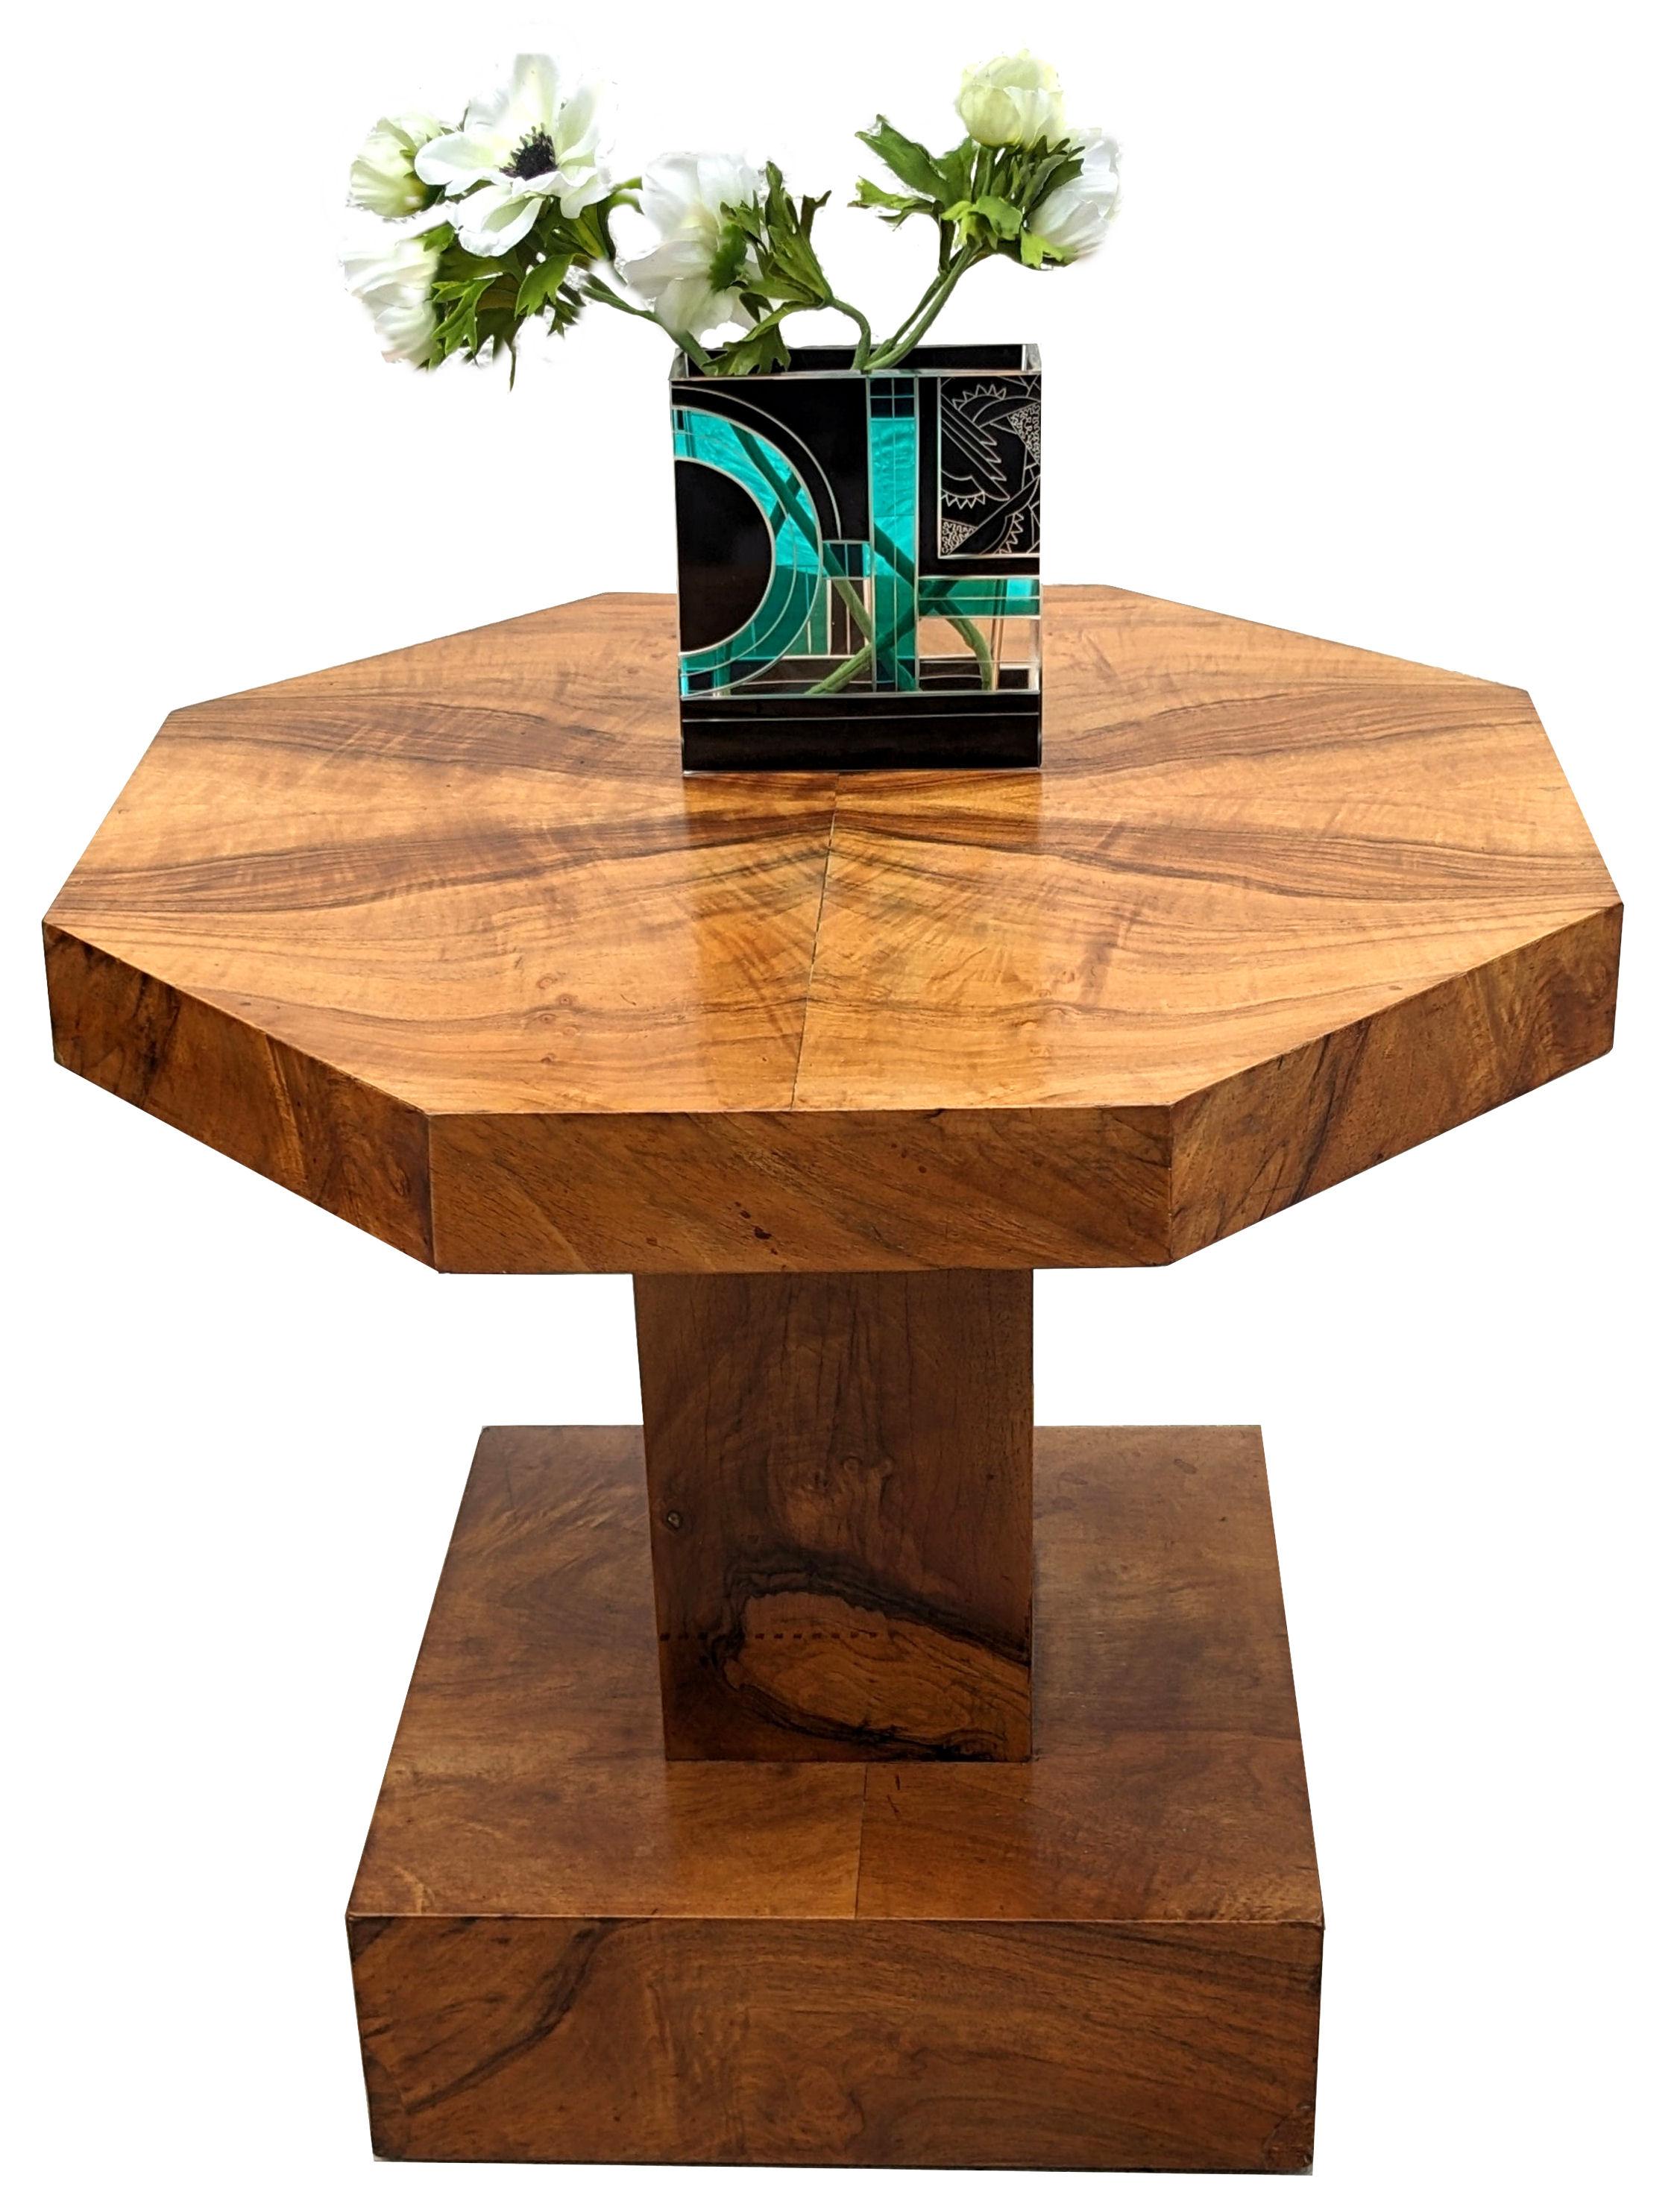 For your consideration is this original 1930s Art Deco walnut occasional coffee table in a mid tone honey colour. Originating from England this is a lovely looking table with great design and form and is in great condition having been newly restored